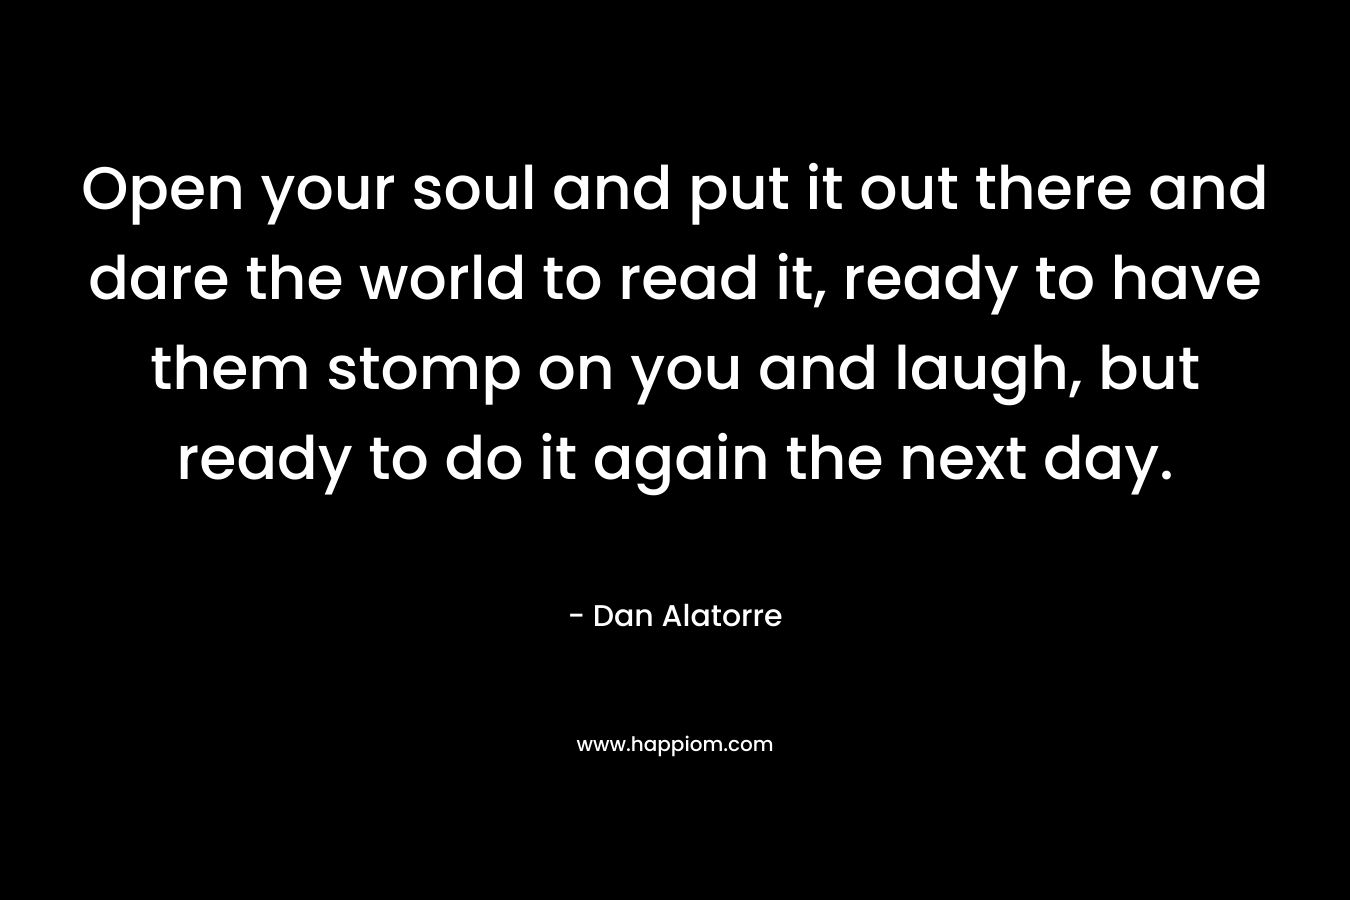 Open your soul and put it out there and dare the world to read it, ready to have them stomp on you and laugh, but ready to do it again the next day. – Dan Alatorre